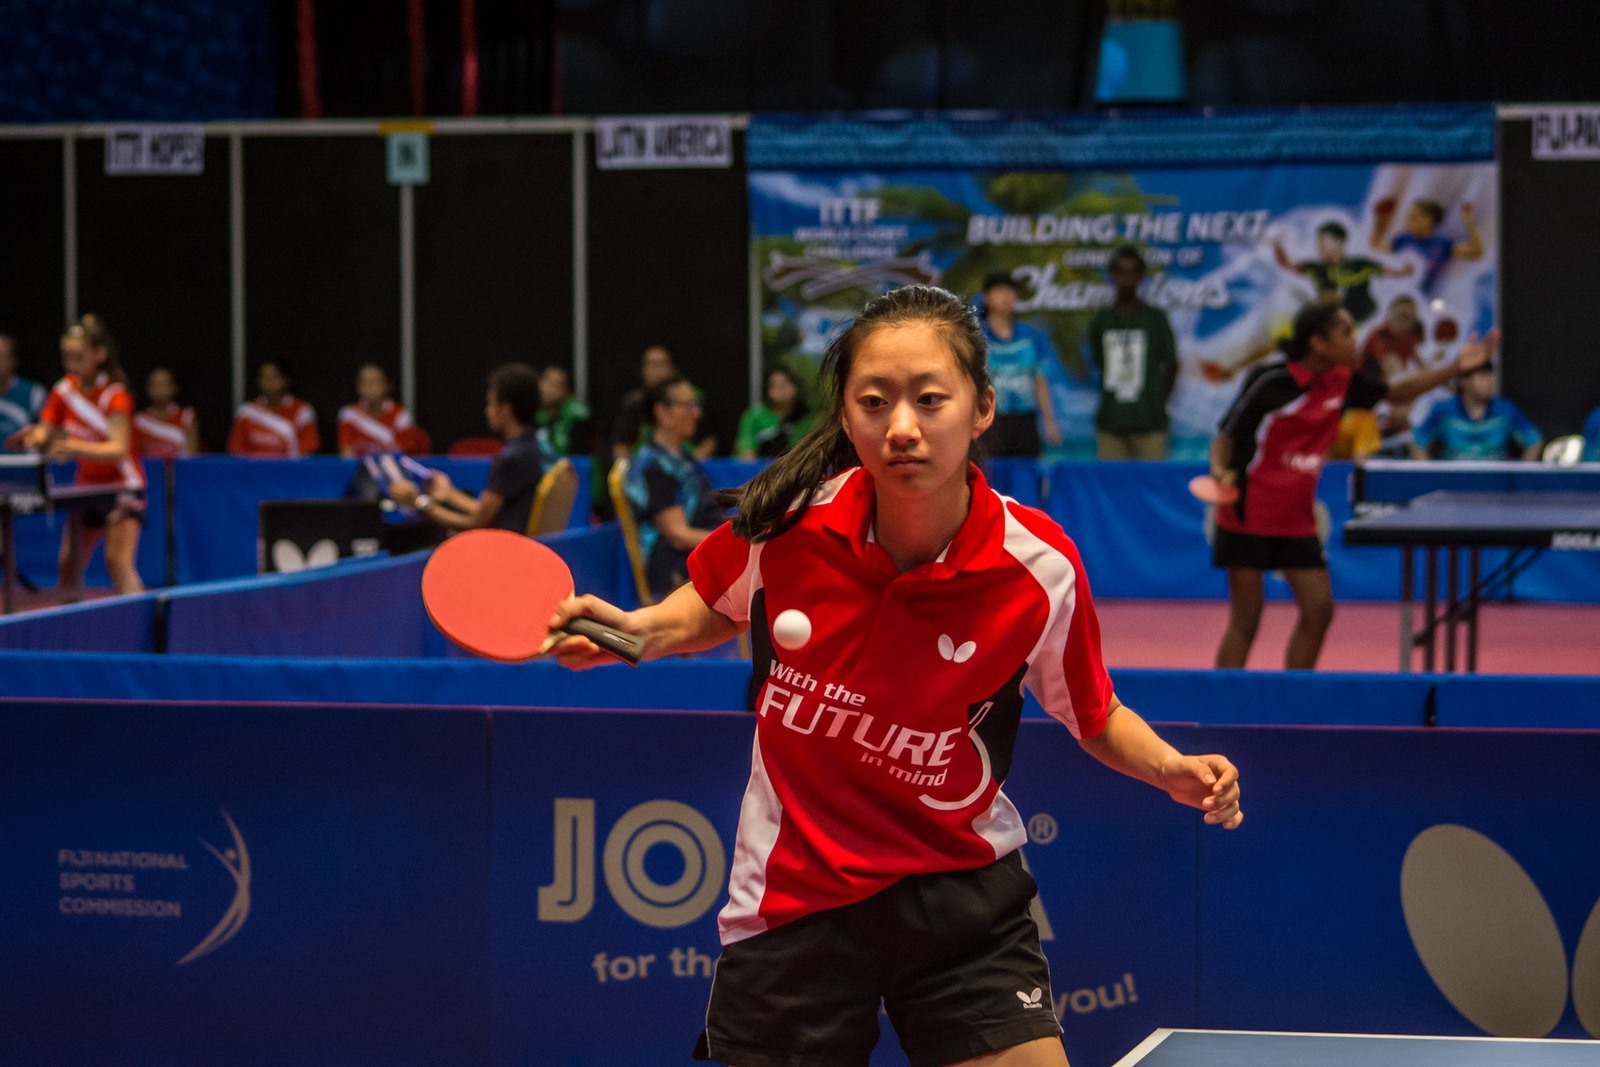 20-facts-about-world-cadet-challenge-table-tennis